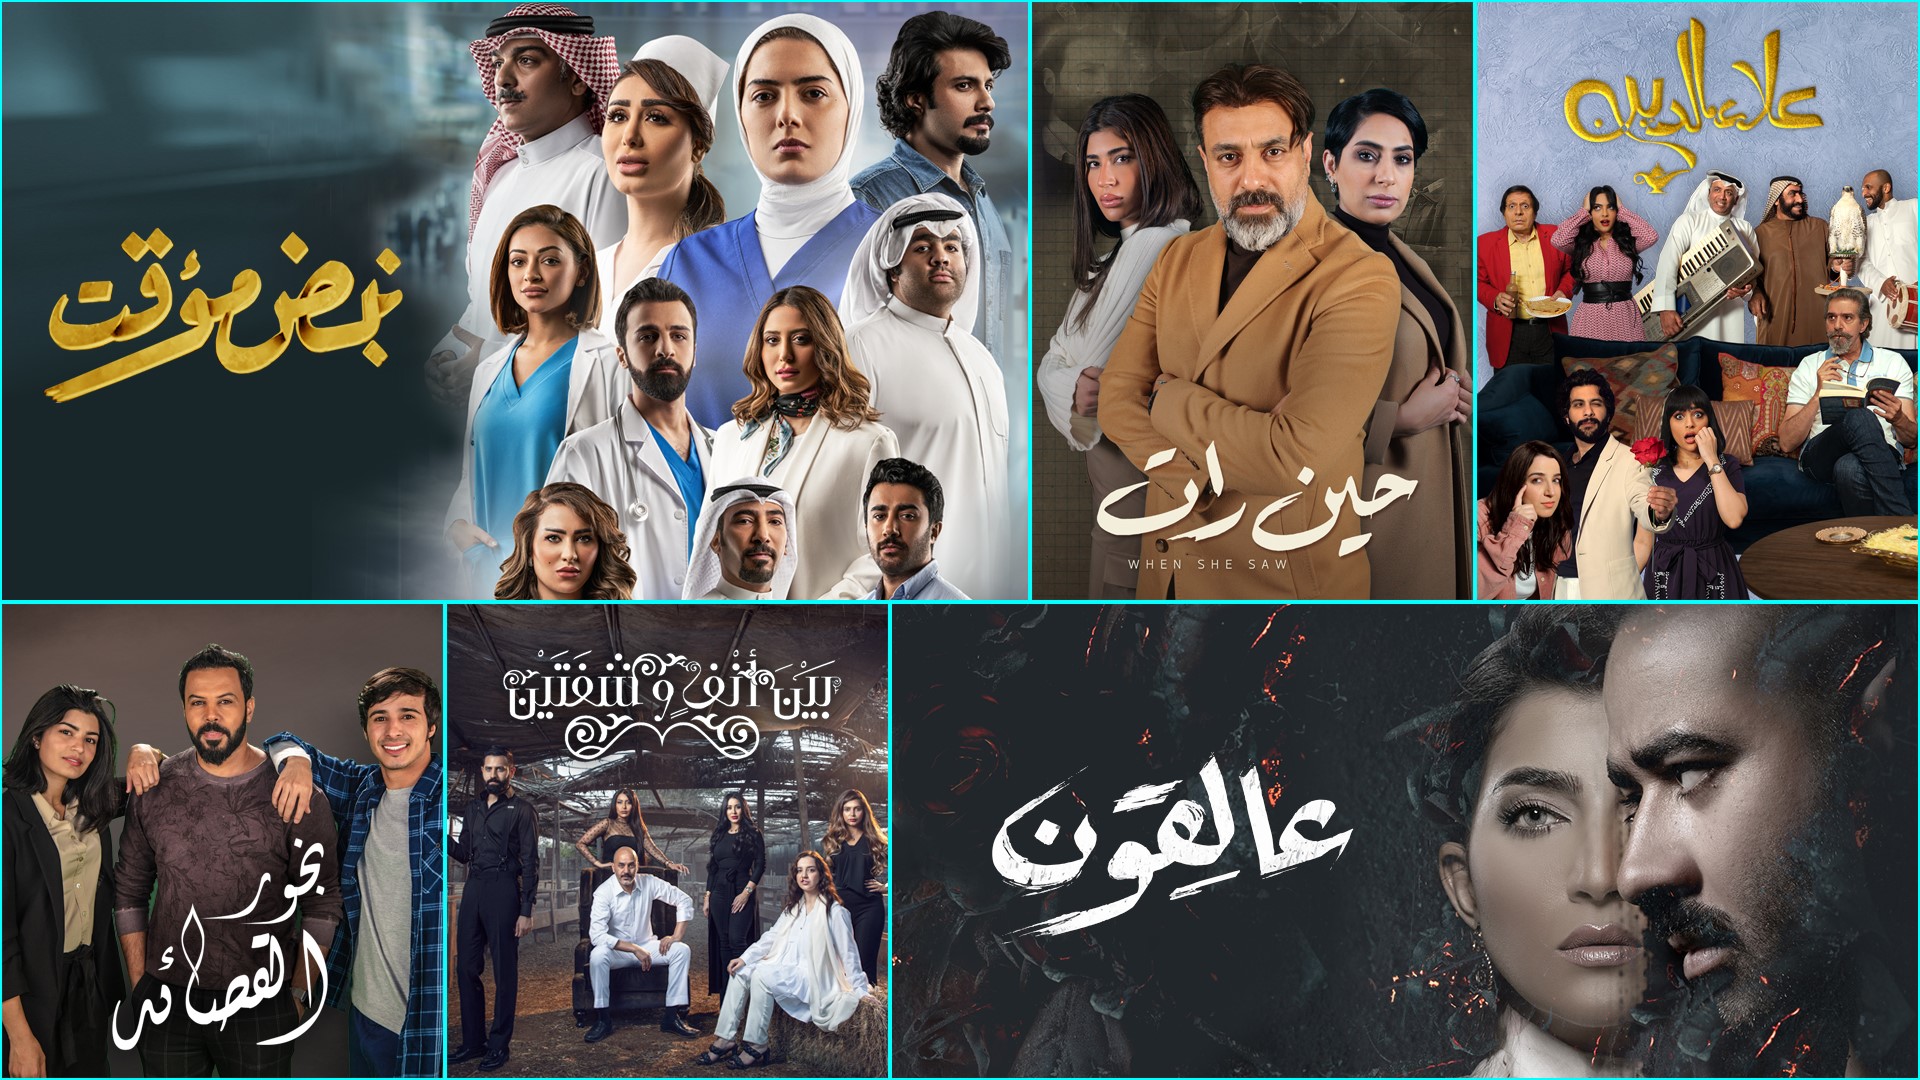 Abu Dhabi Media Extends Partnership With STARZPLAY To Broadcast New Shows During Ramadan